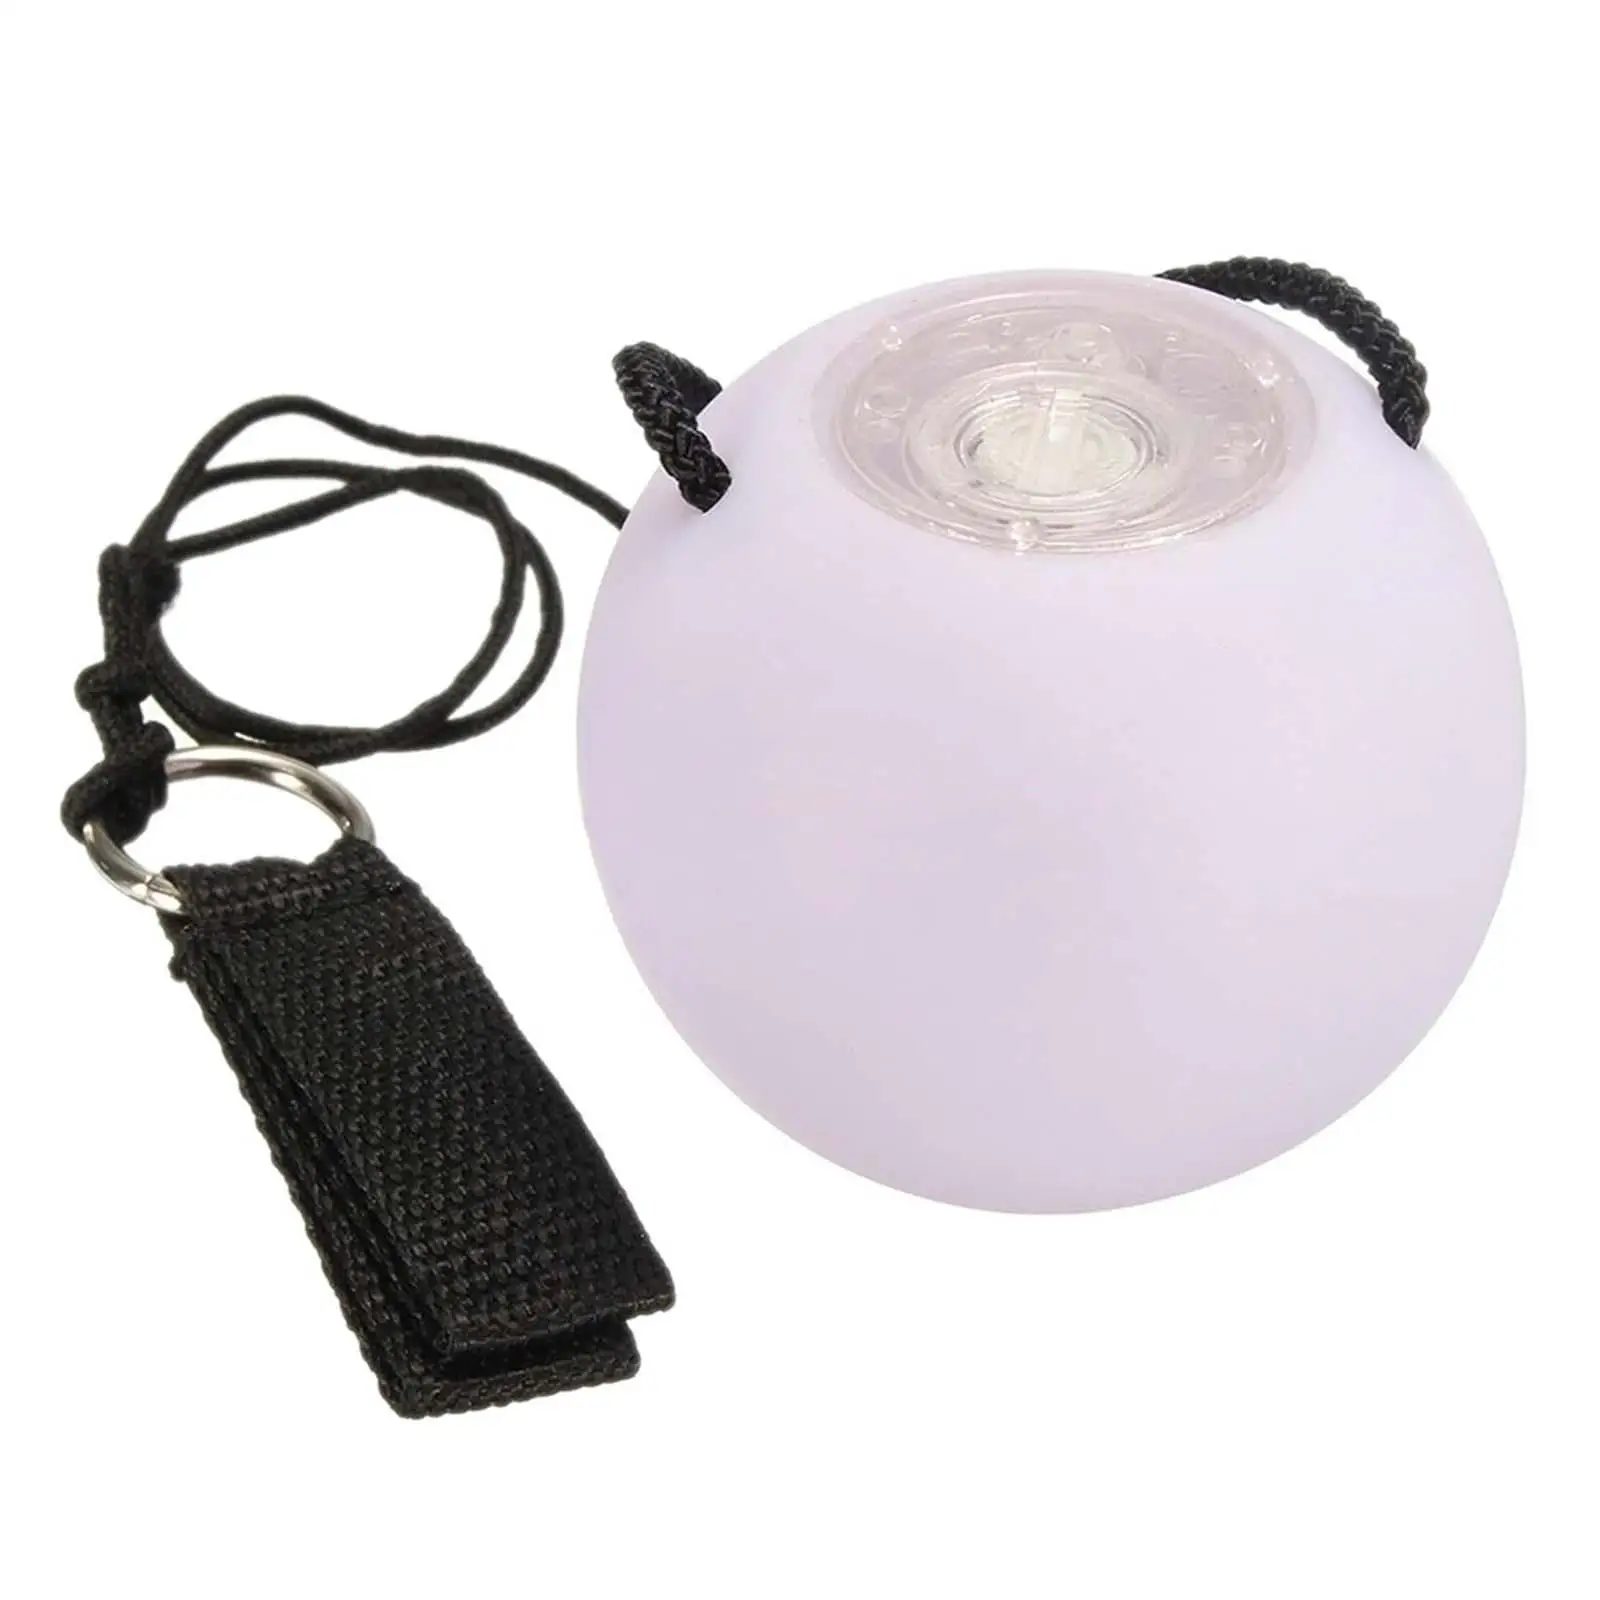 Ball Light up for Belly Dance with Rod Gym Exercise Ball for Picnic Travel